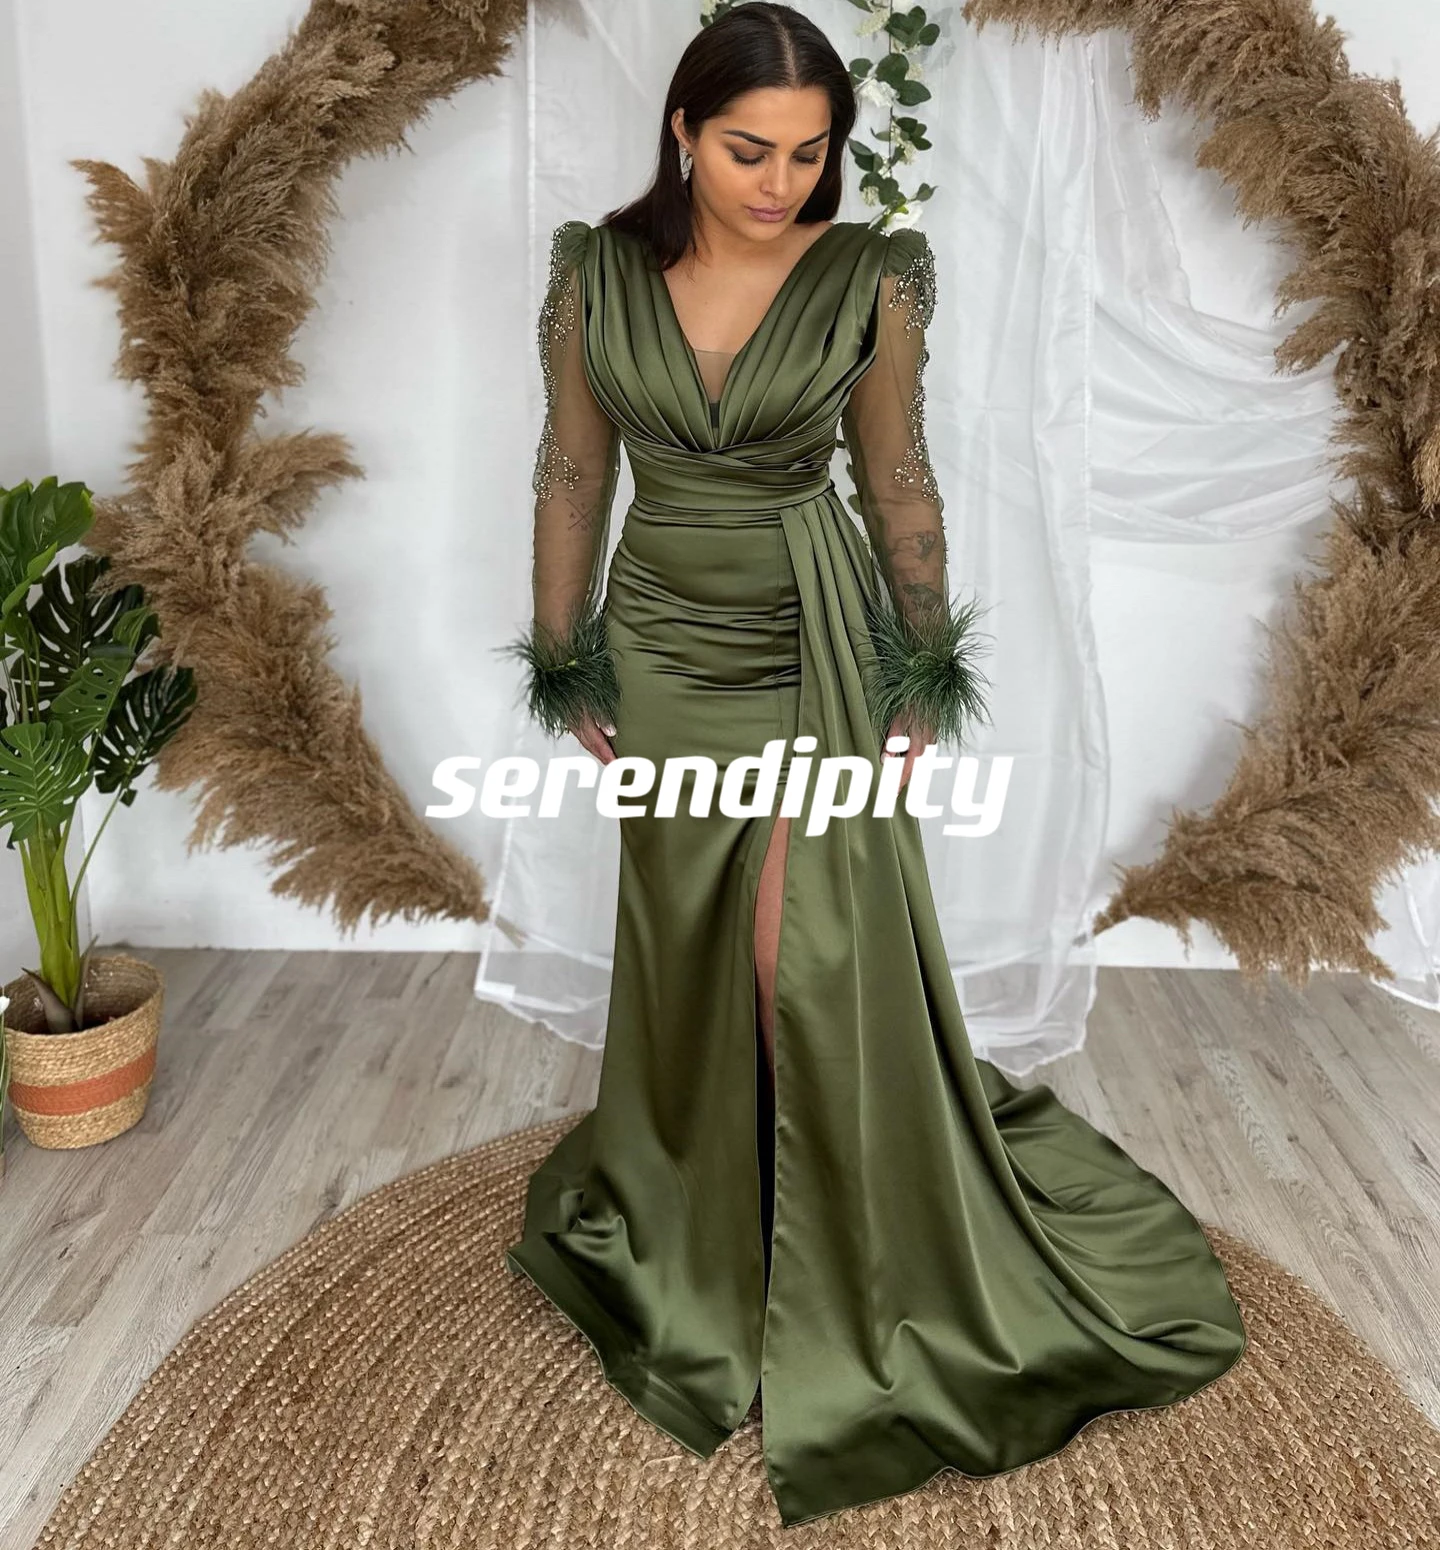 

Serendipity Ball-Gown V-neck Floor-length Ruffle Feather Lace Beadings Satin Zipper Up CapStraps Long Sleeves Prom Dresses